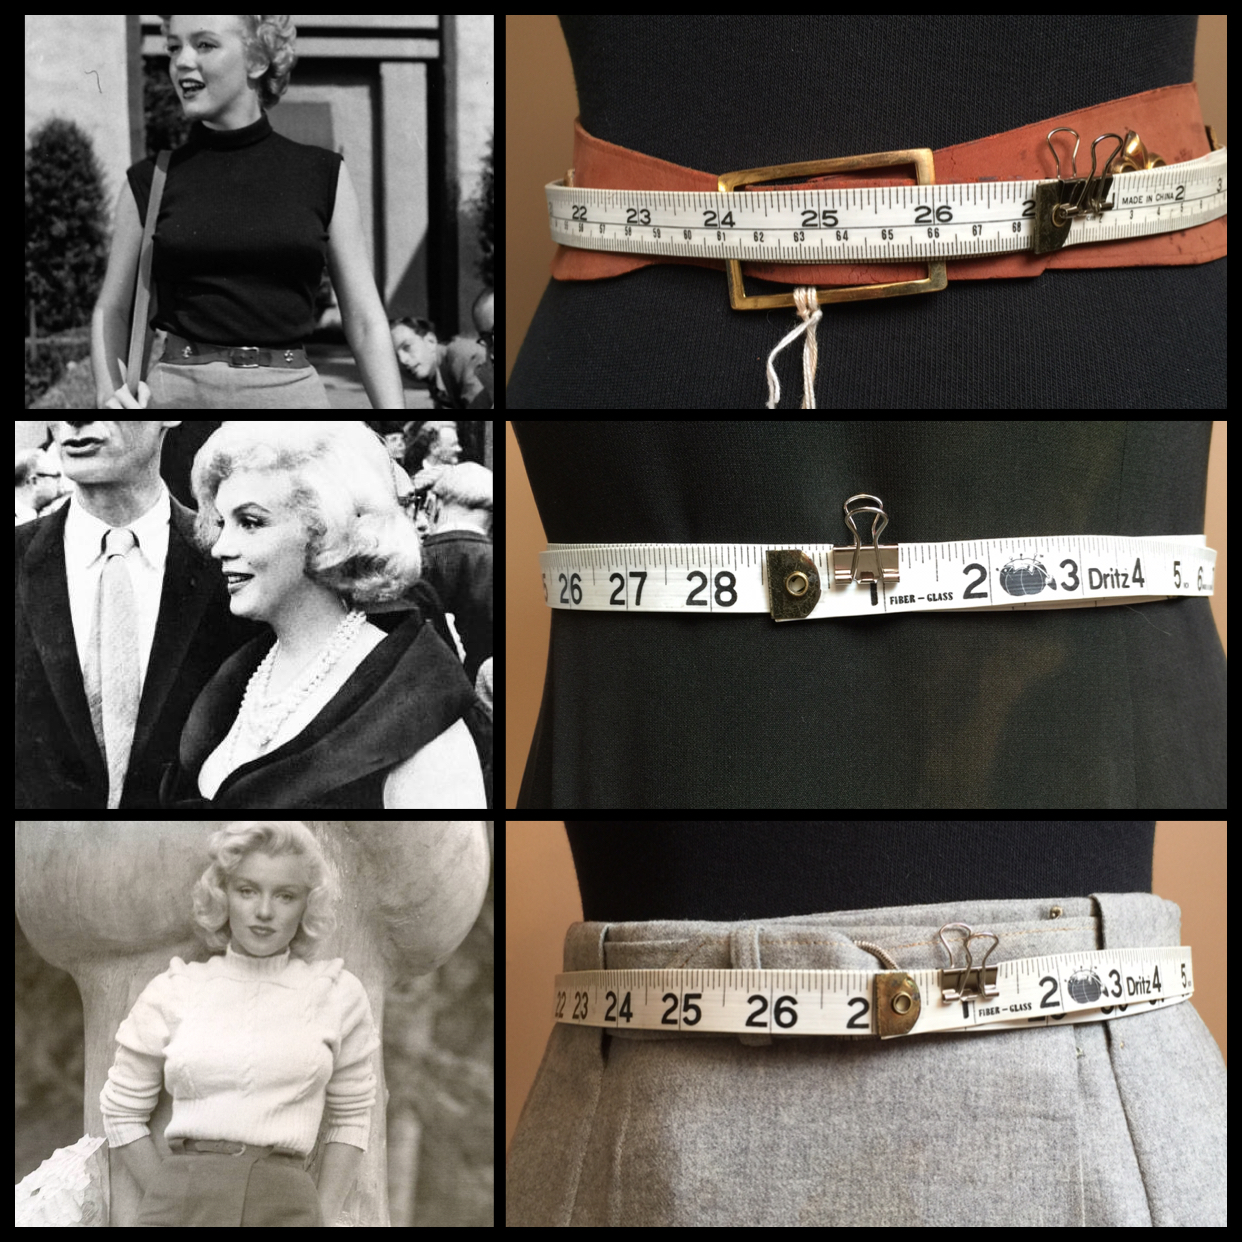 http://themarilynmonroecollection.com/marilyn-monroe-true-size/